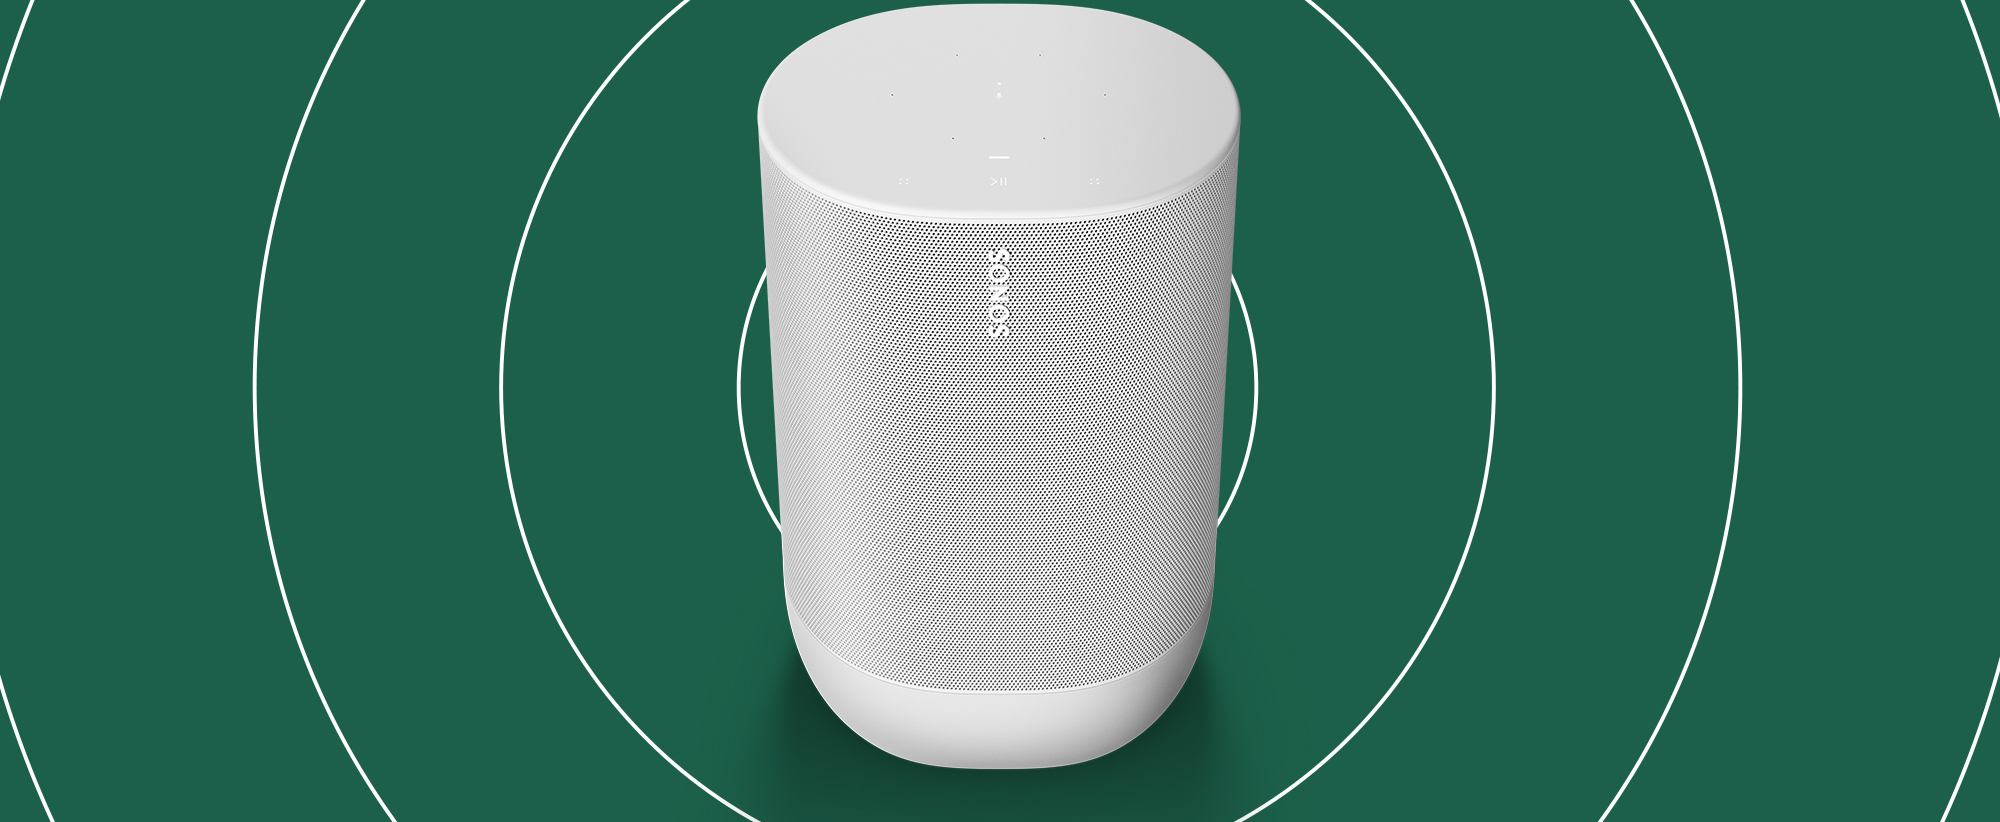 Move the Sonos devices closer to the router or access point to improve signal strength.
Reduce interference by keeping Sonos devices away from other wireless devices or appliances.